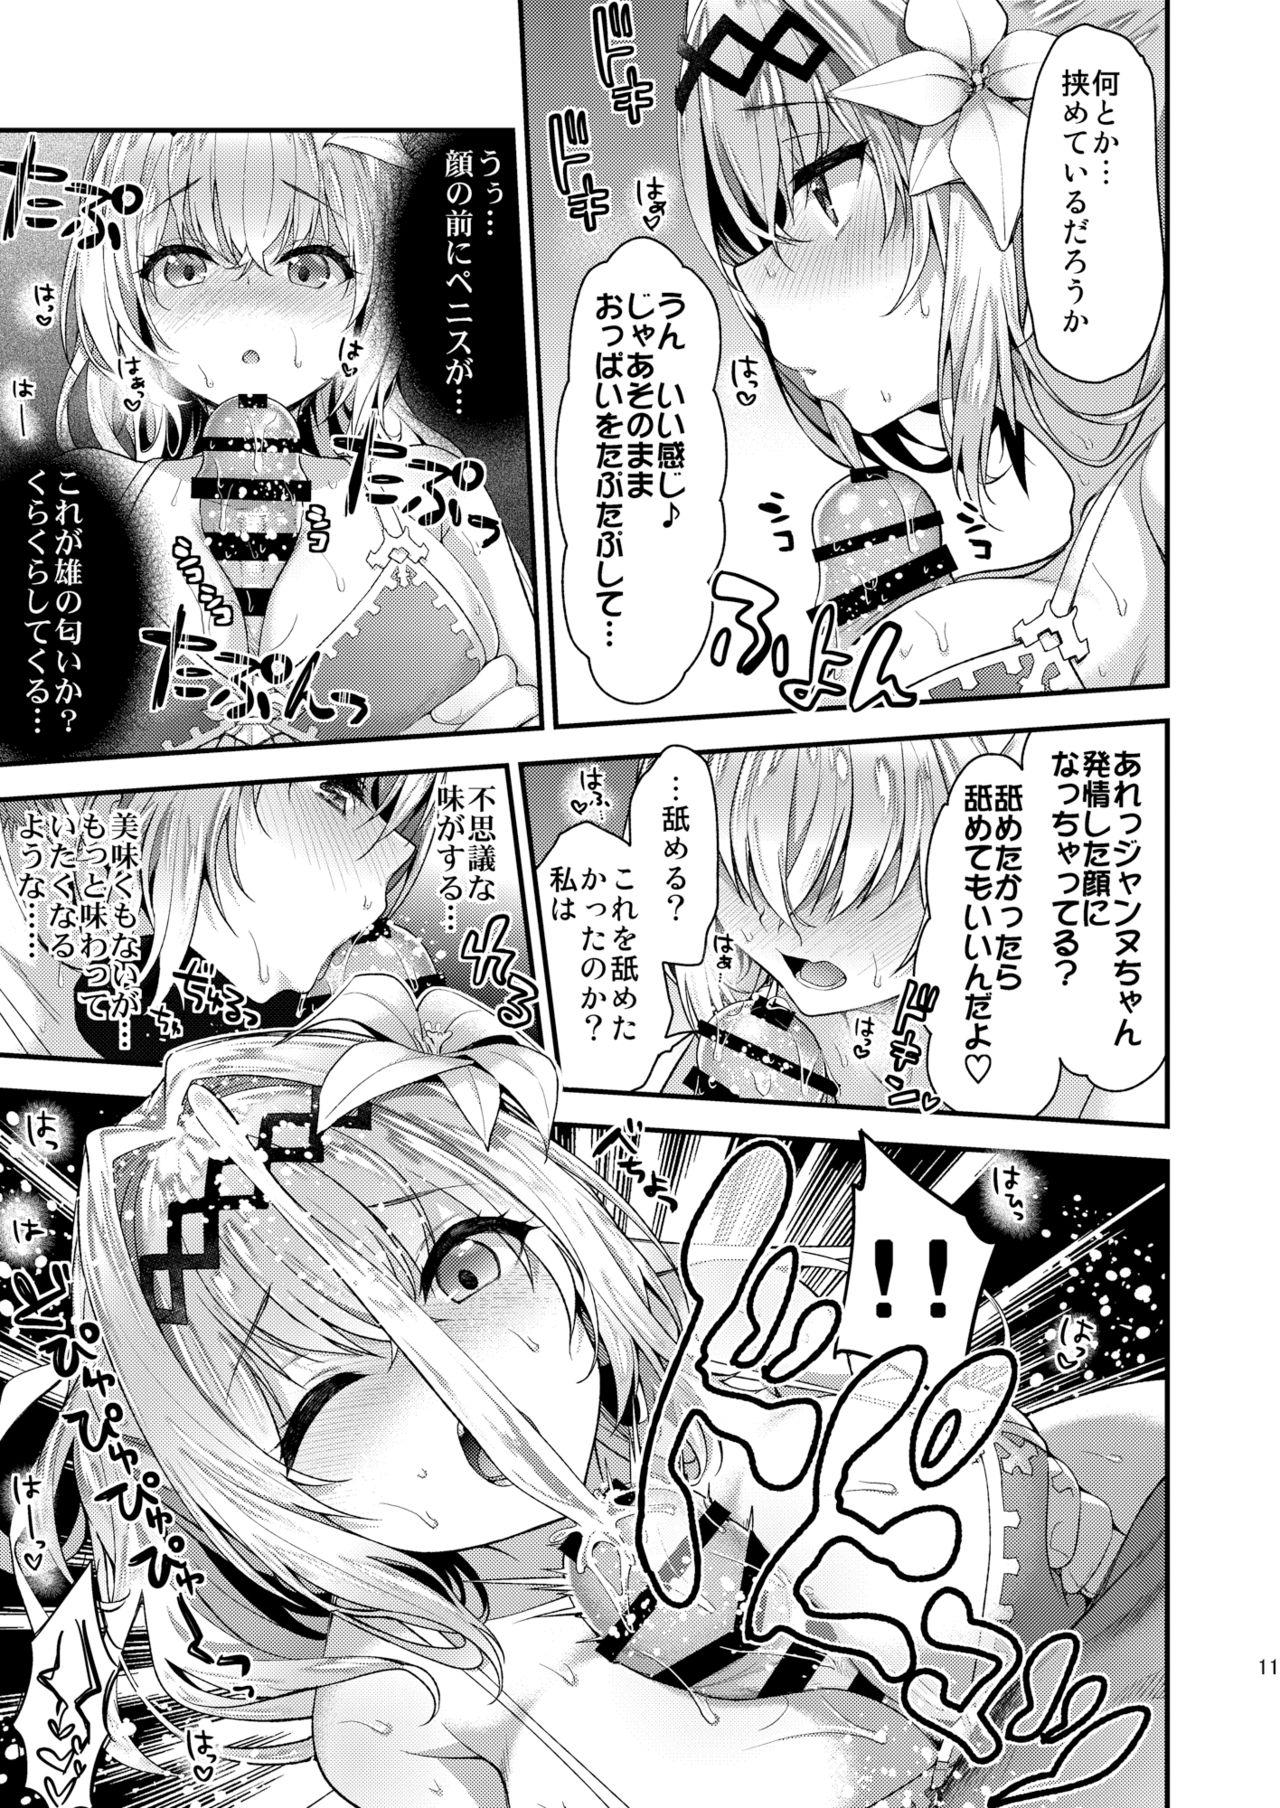 Riding Cock Narmaya & Jeanne to Dokidoki Summer Vacation - Granblue fantasy Interview - Page 8